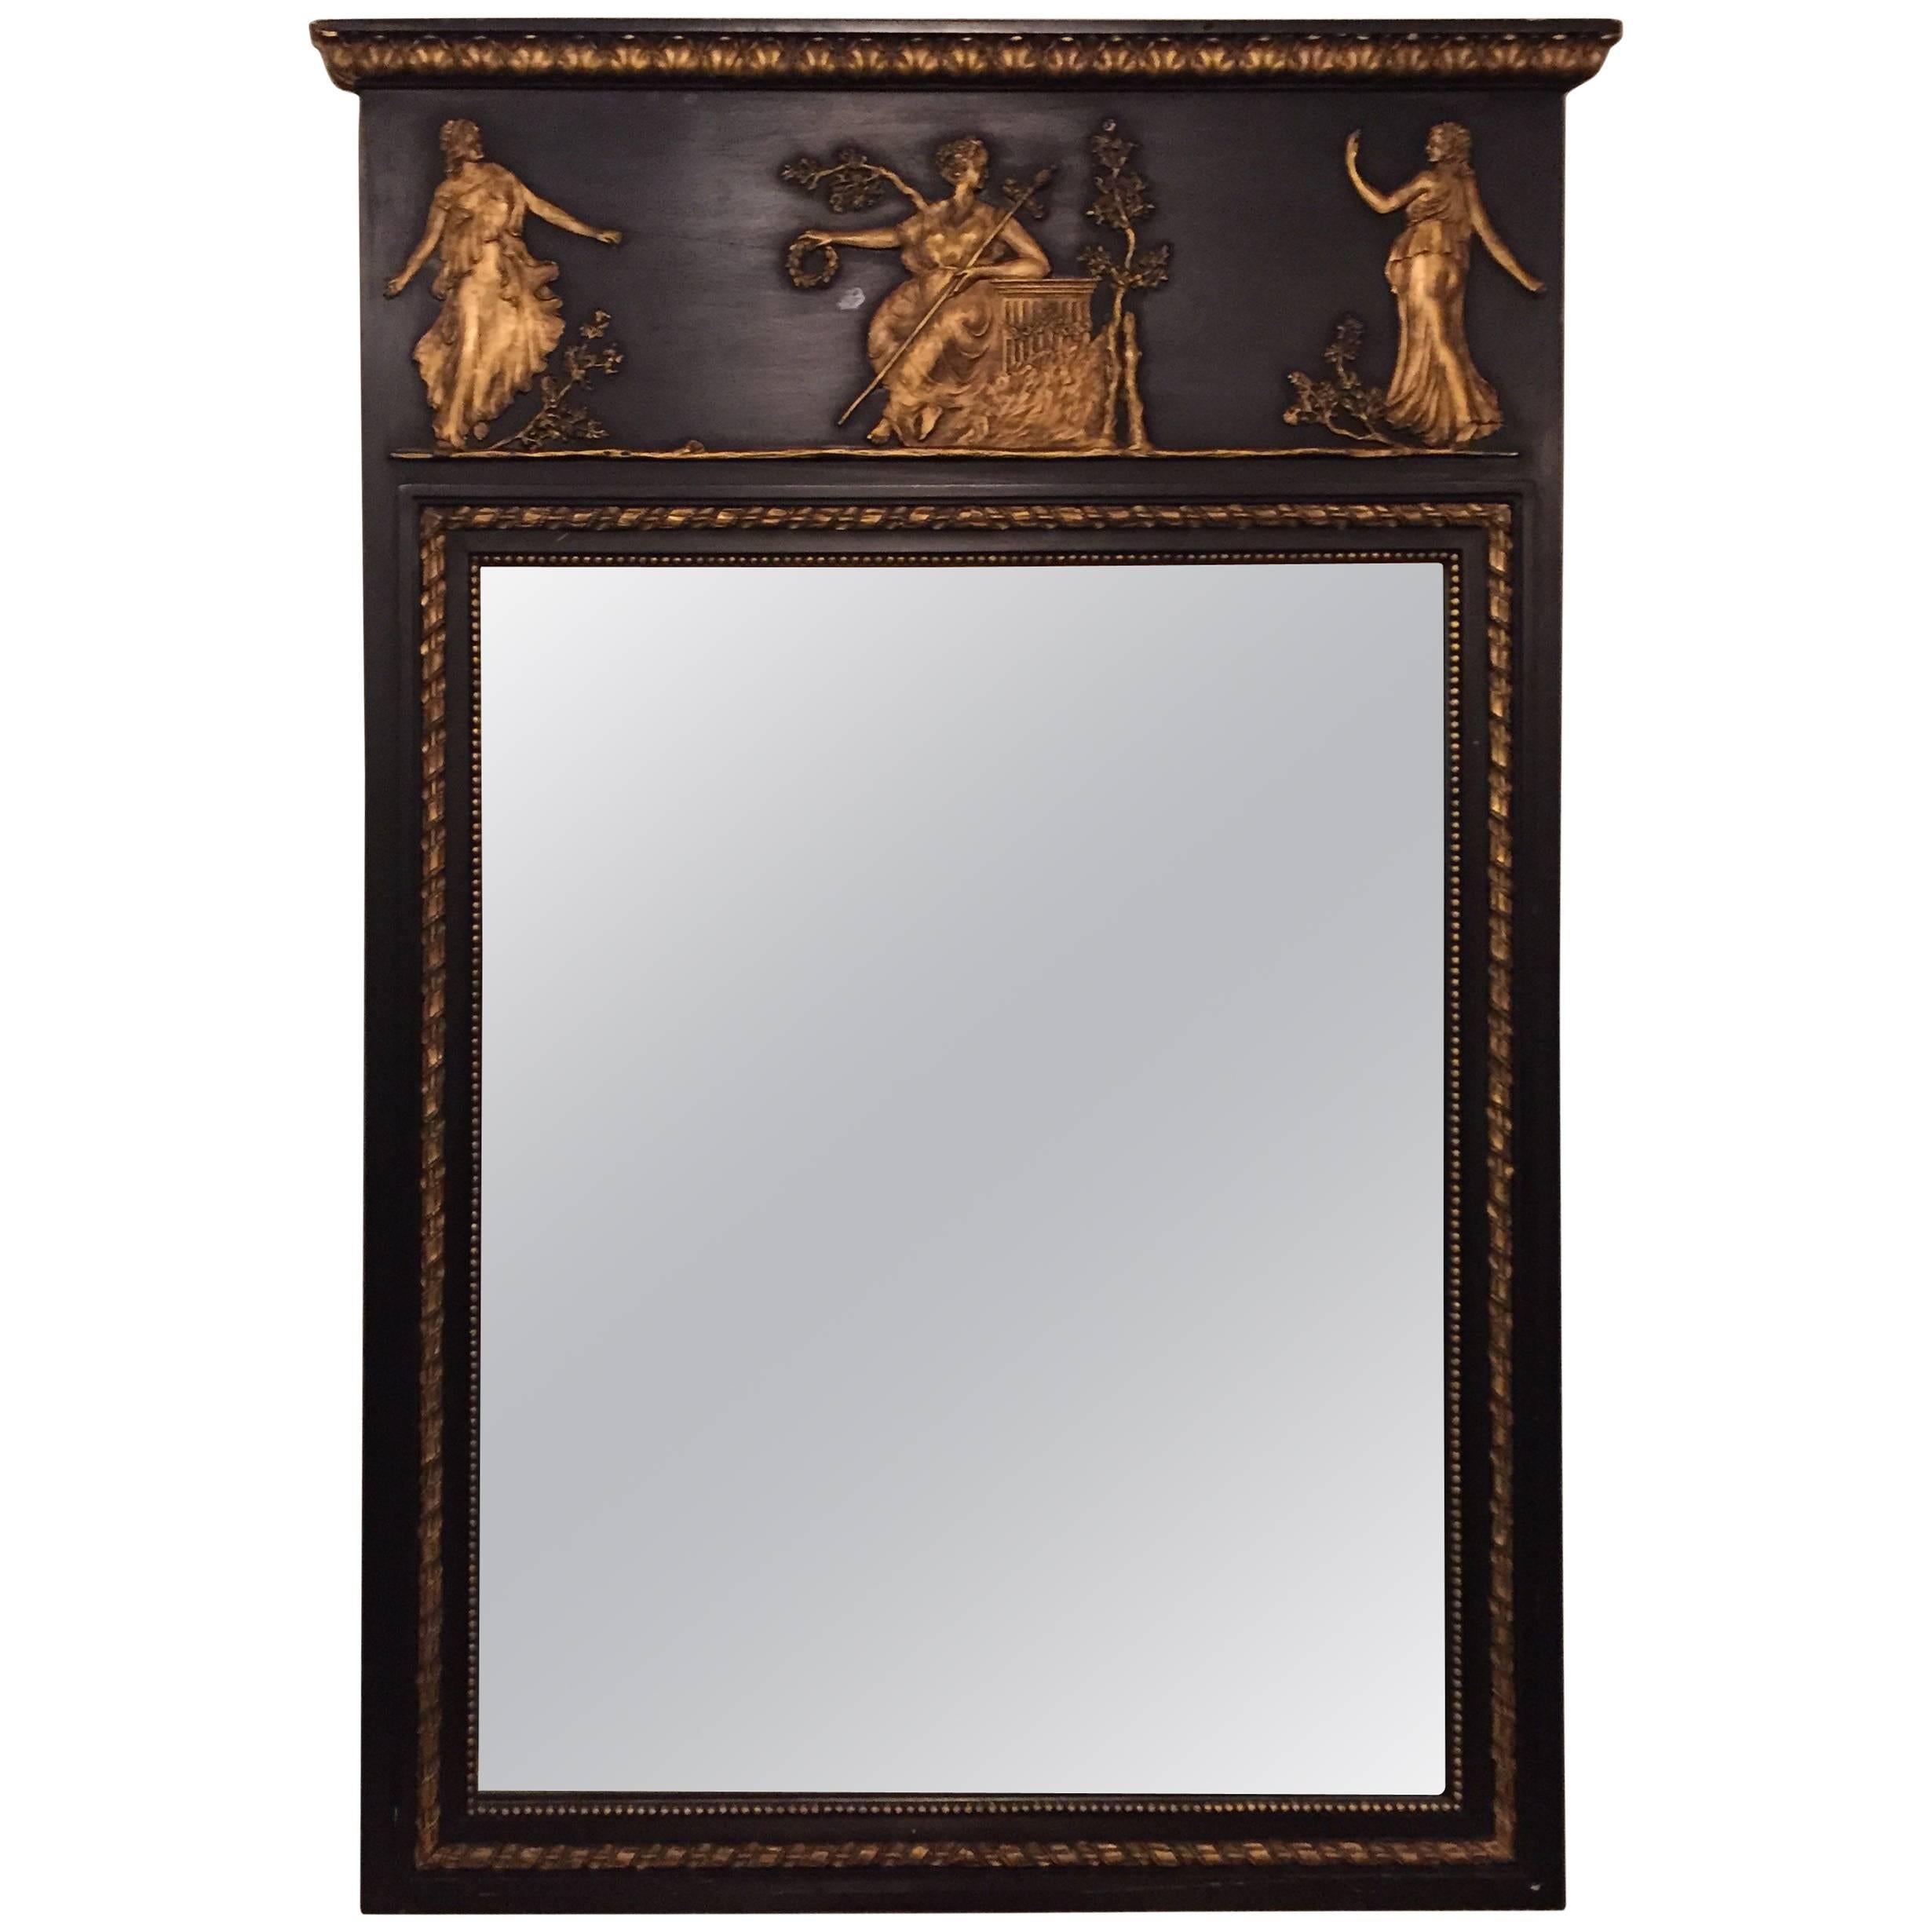 Ebonized Neoclassical Mirror by Friedman Bros Depicting Dancing Musical Maidens